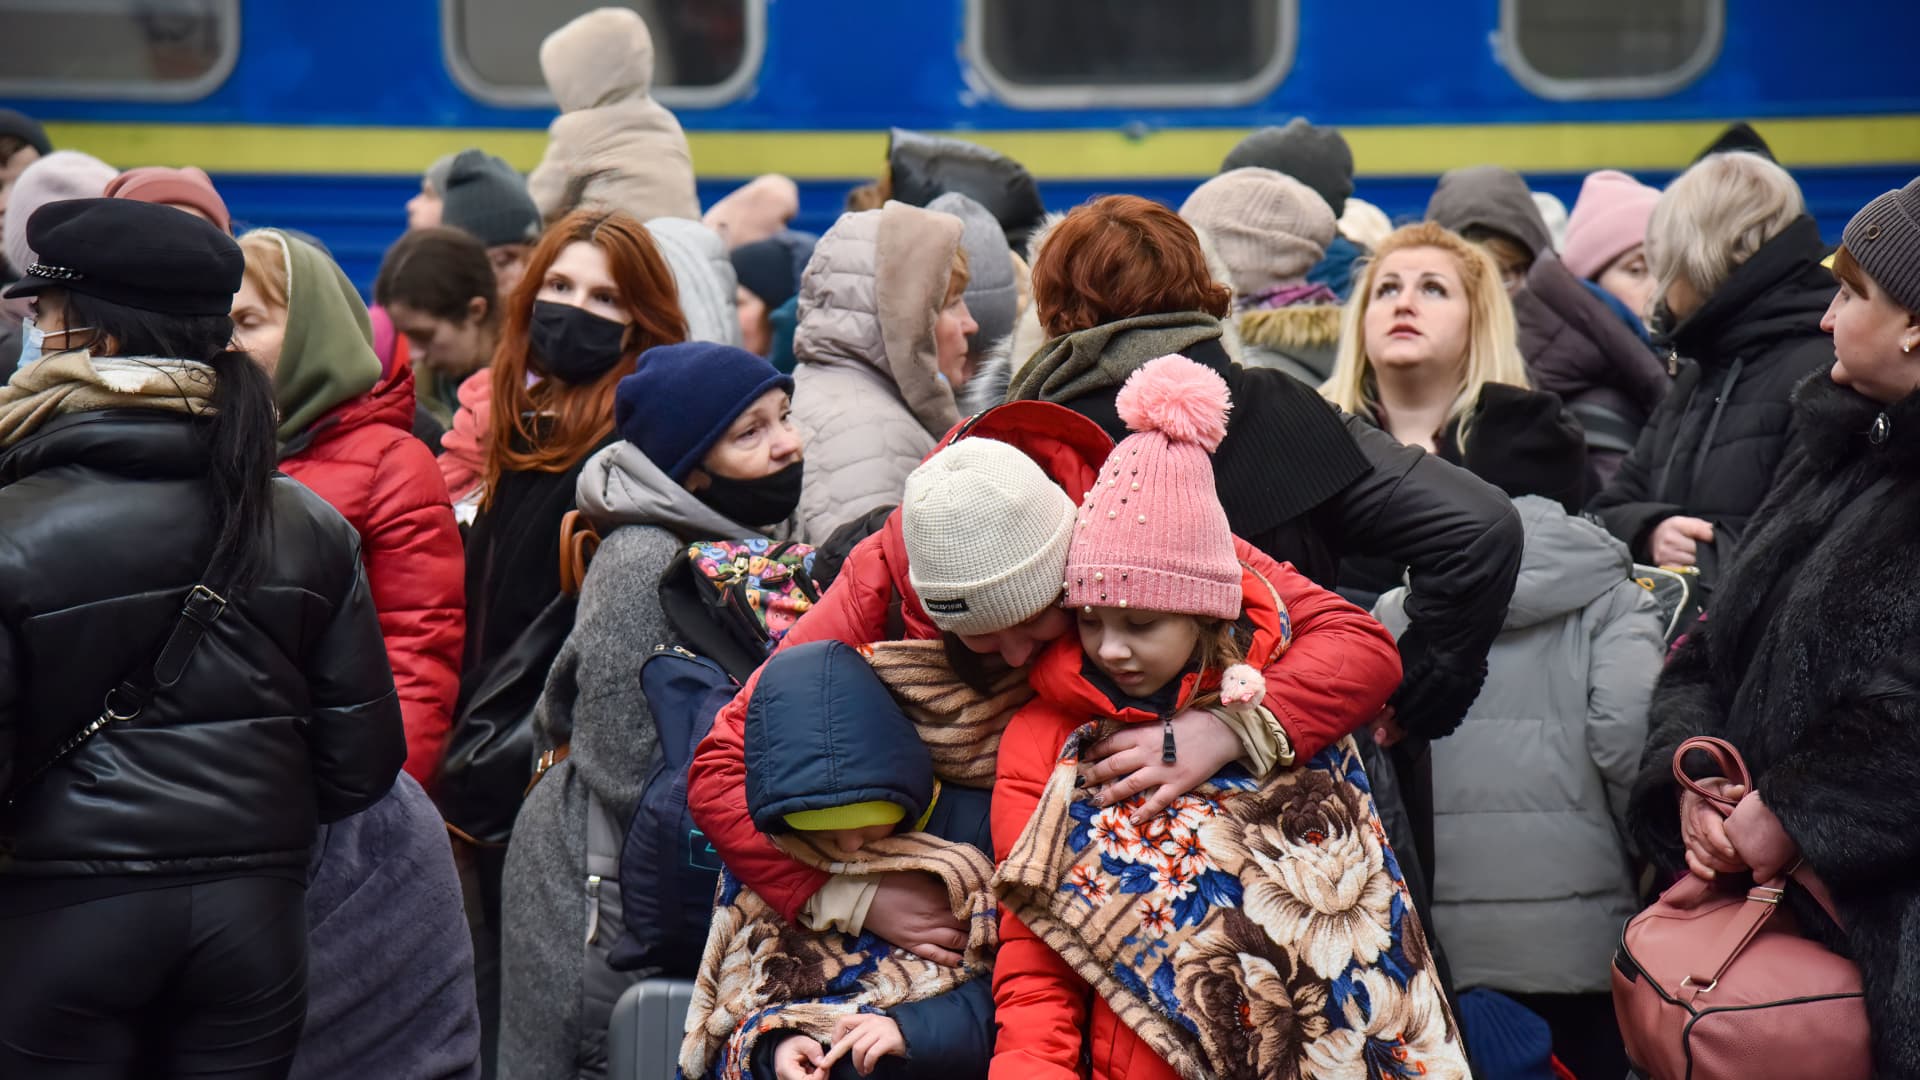 Refugees on the platform of Lviv railway station are seen waiting for trains to Poland on Feb. 27th, 2022.